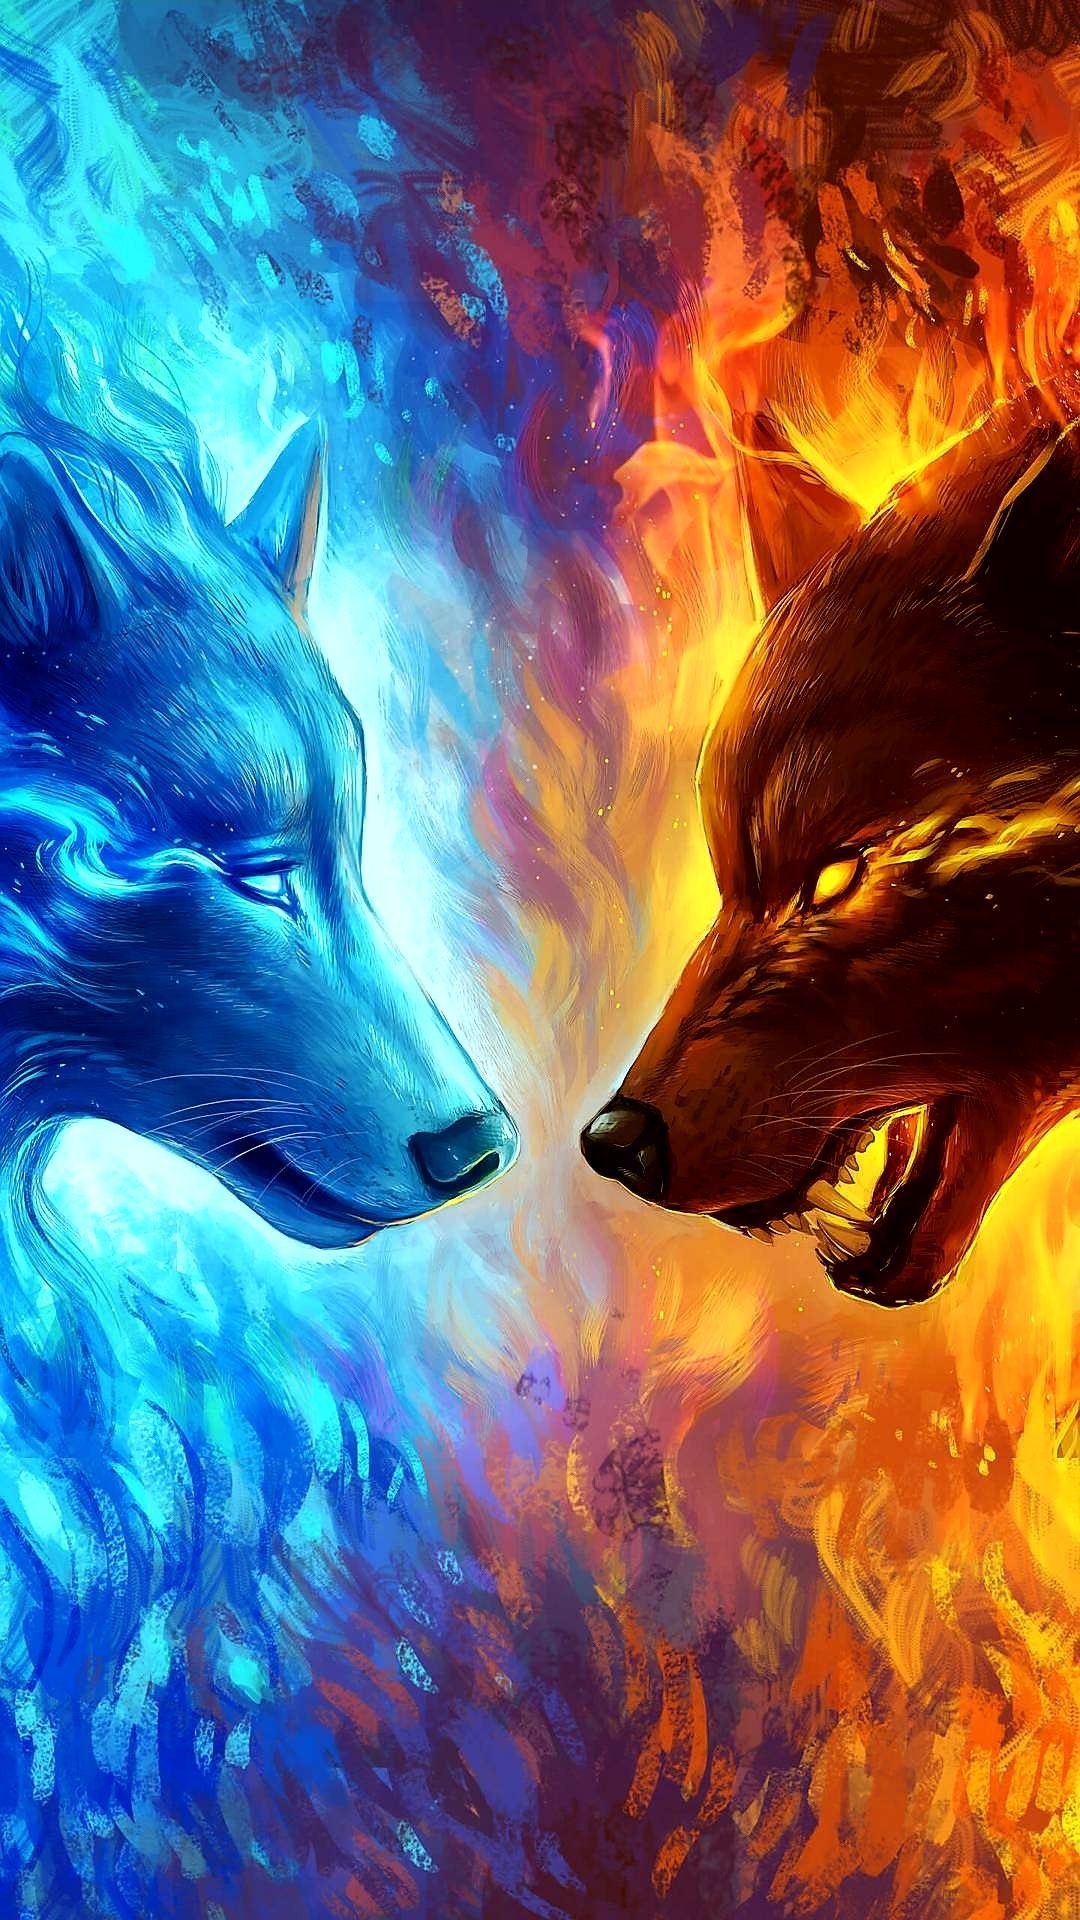 Anime Wolves Wallpapers